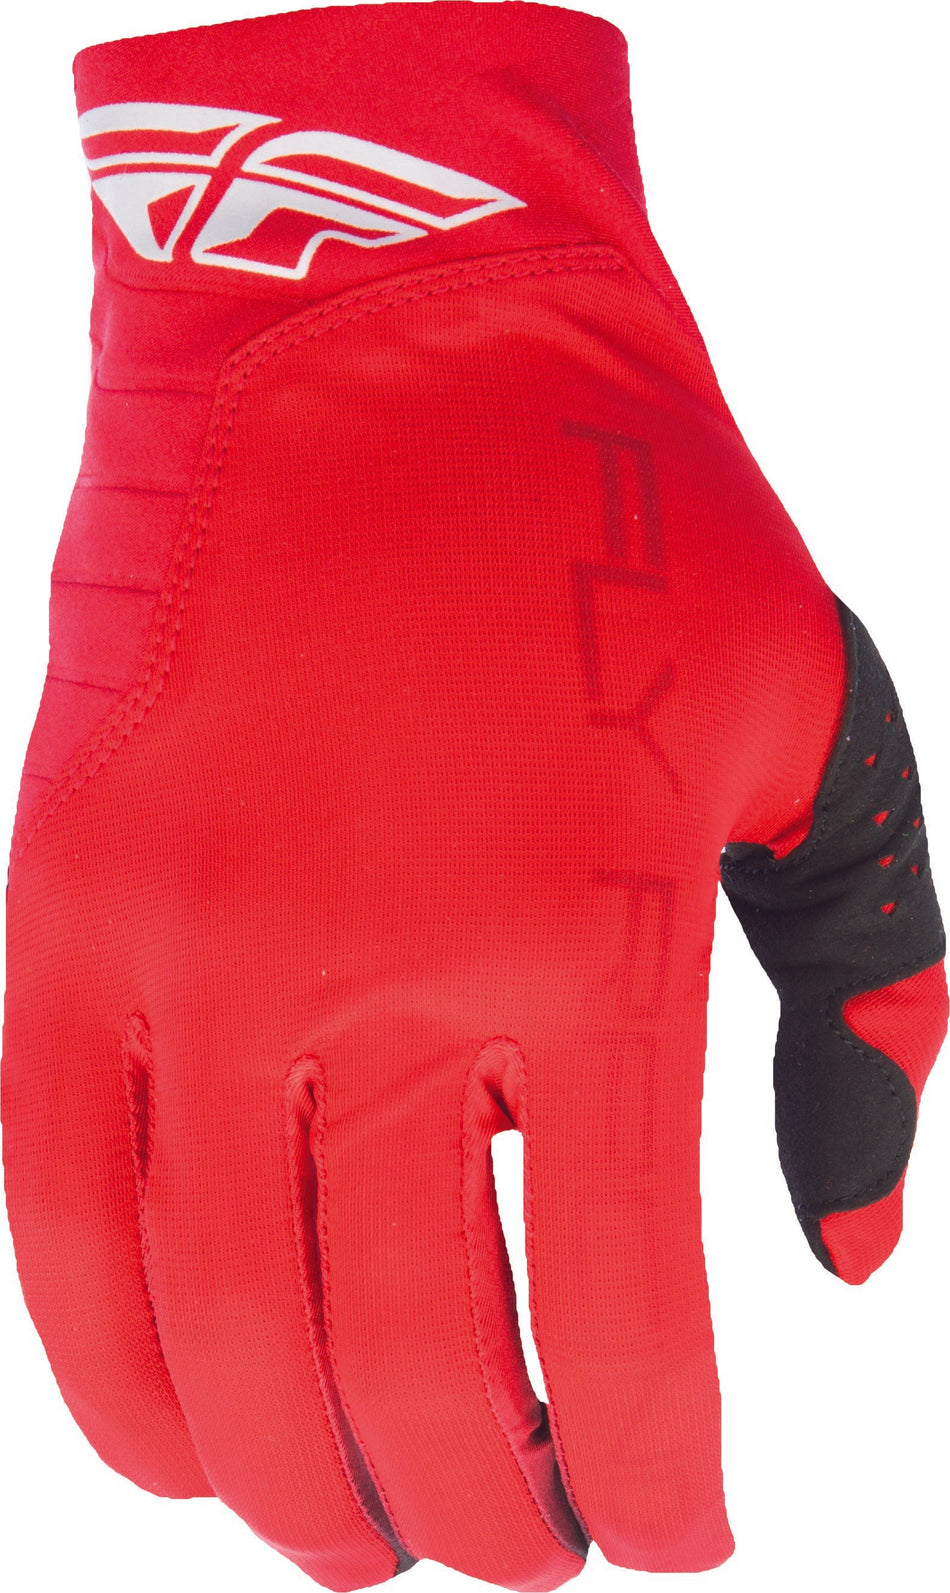 FLY RACING Pro Lite Glove Red Sz 6 Yl 370-81206